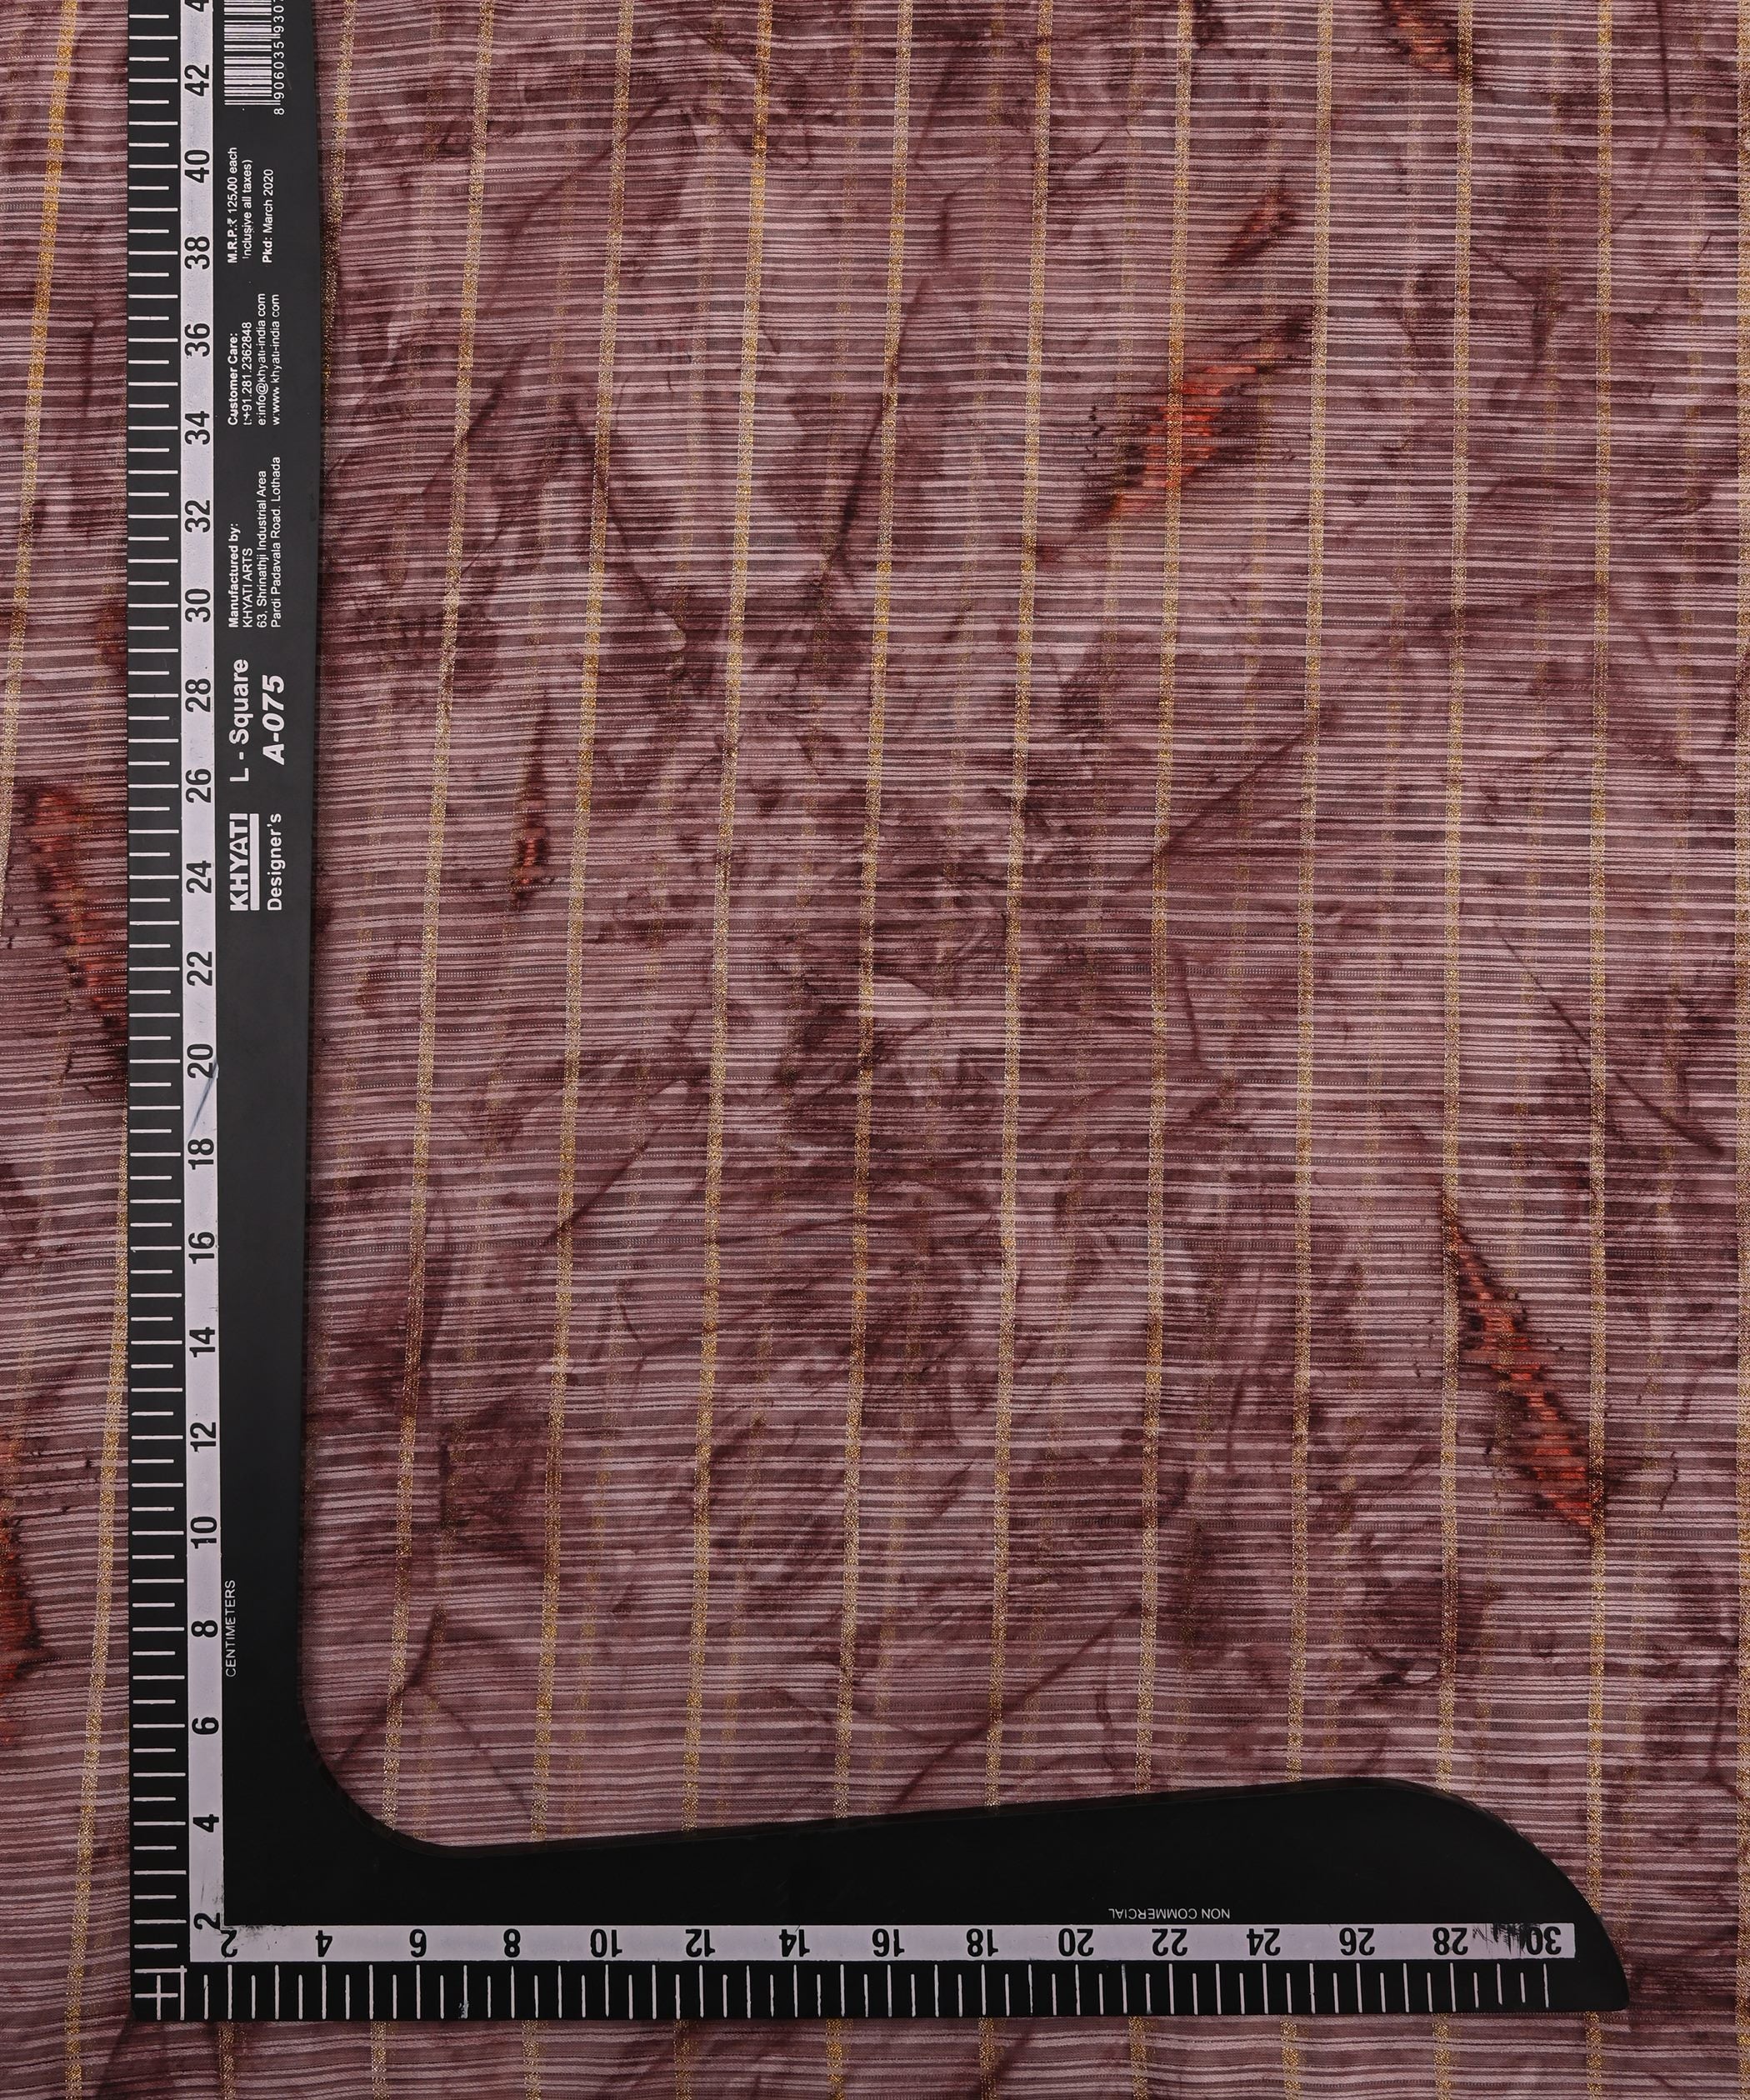 Wine Weightless Fabric with Shibori and Golden Stripes